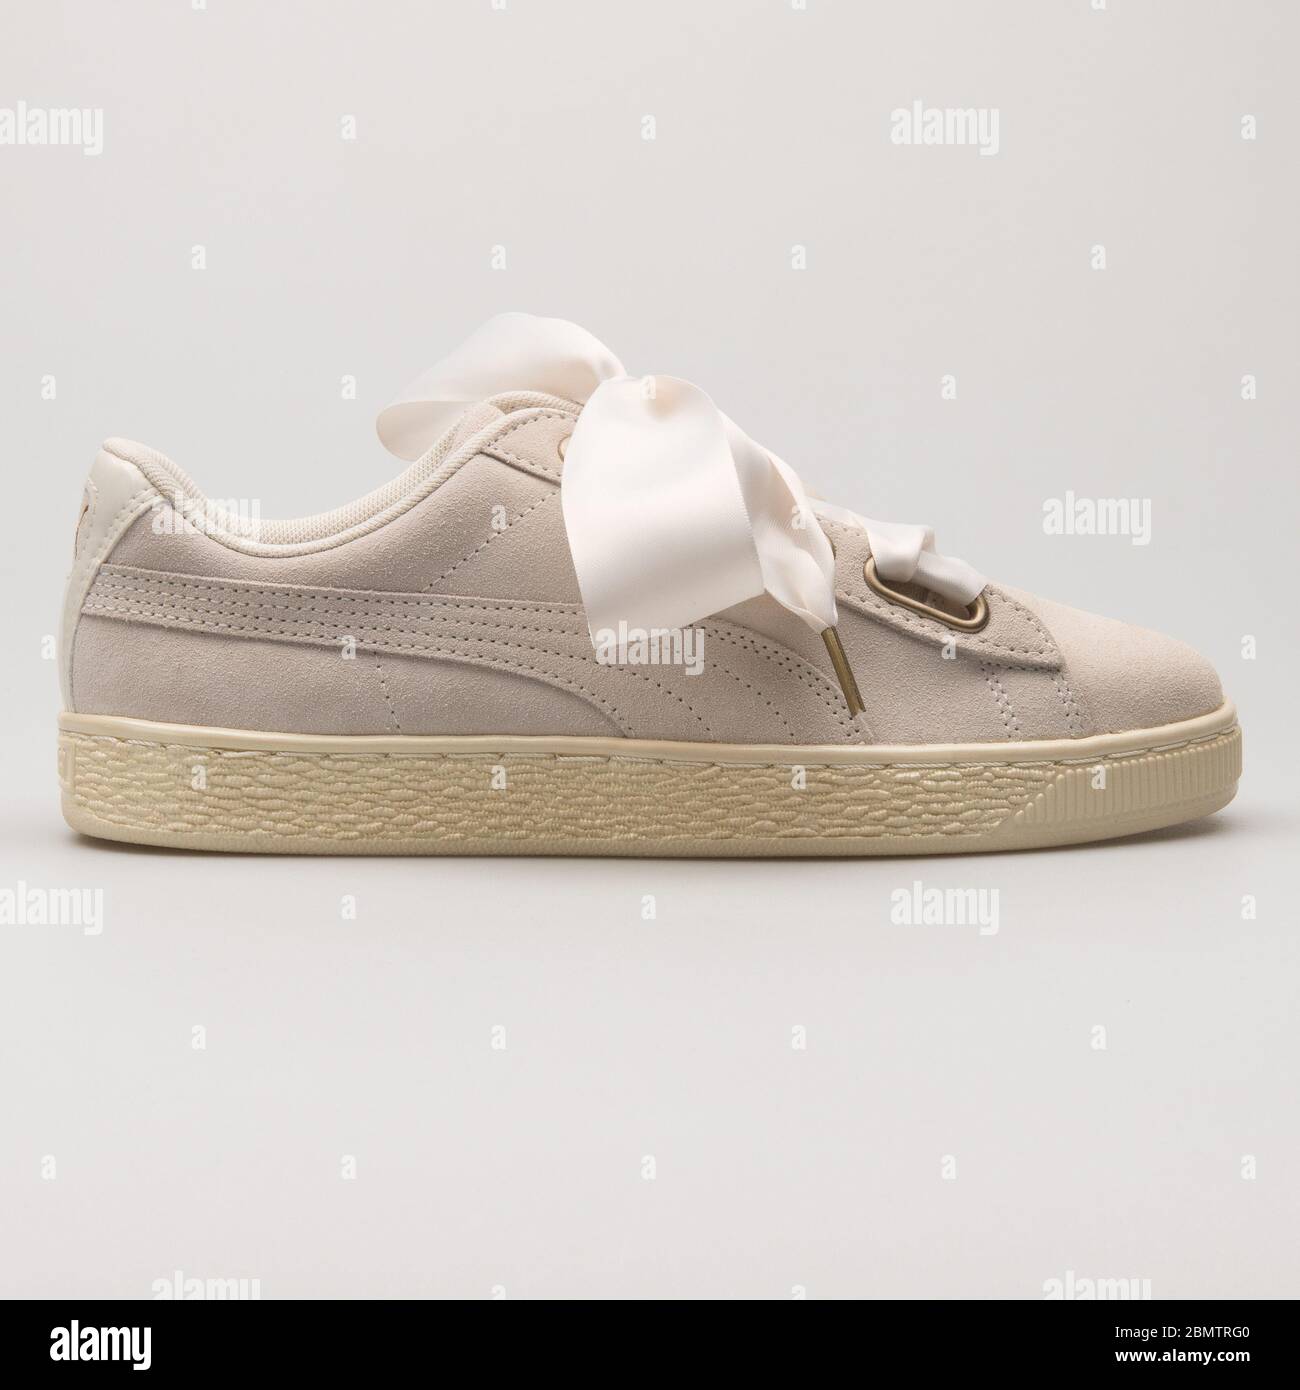 VIENNA, AUSTRIA - MAY 27, 2018: Puma Suede Heart Satin beige and gold  sneaker on white background Stock Photo - Alamy